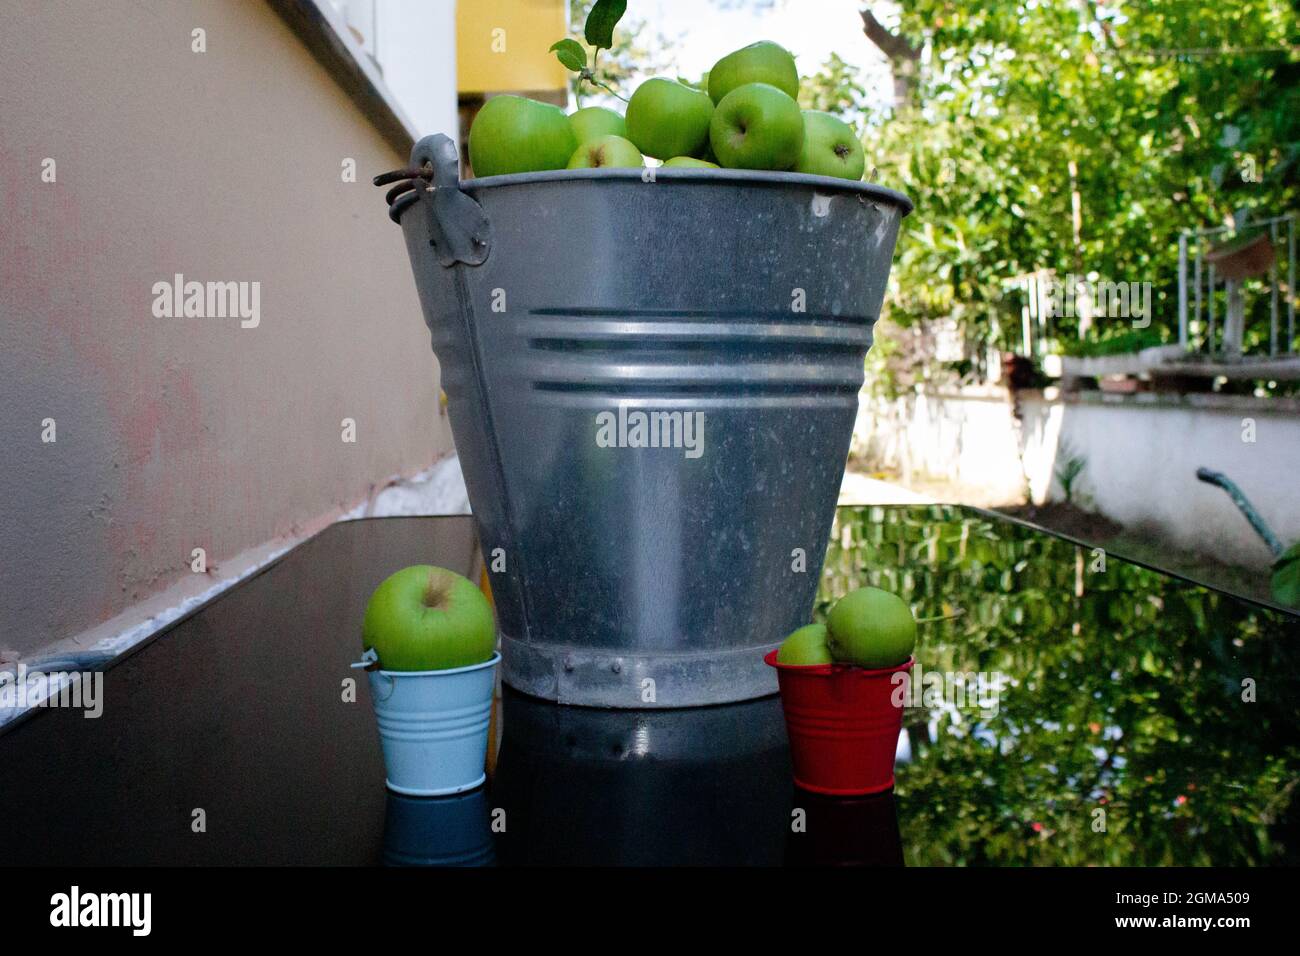 apples in buckets. people's share is related with their effort. effort is money. how much you put that much you get. Stock Photo